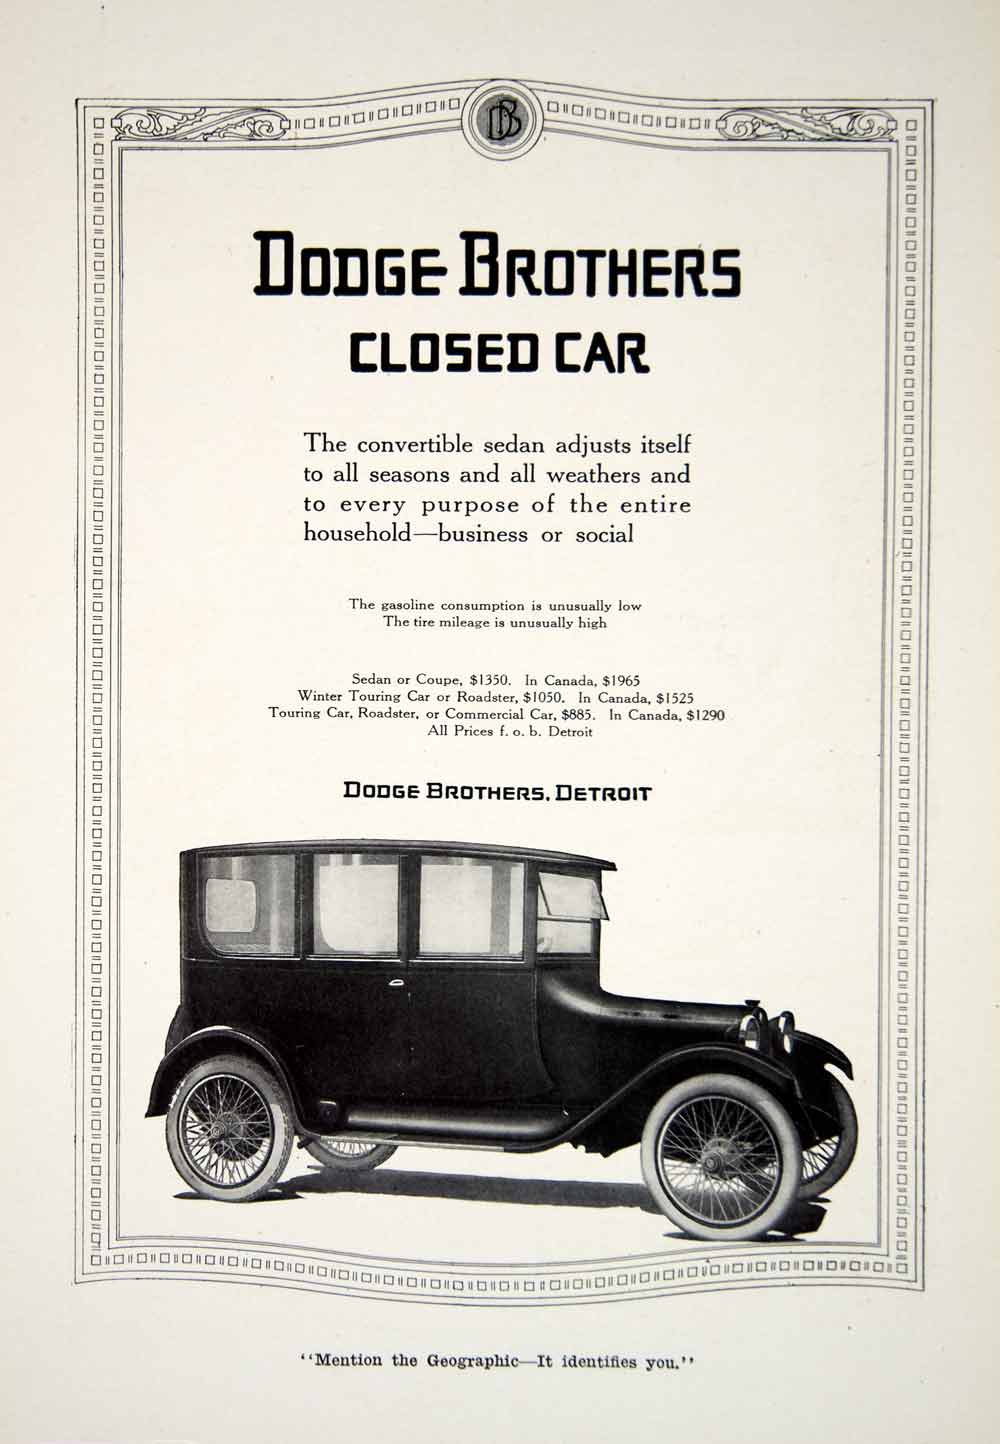 1918 Ad Dodge Brothers Car Company Closed Vehicle Automobile Detroit Image YNG2